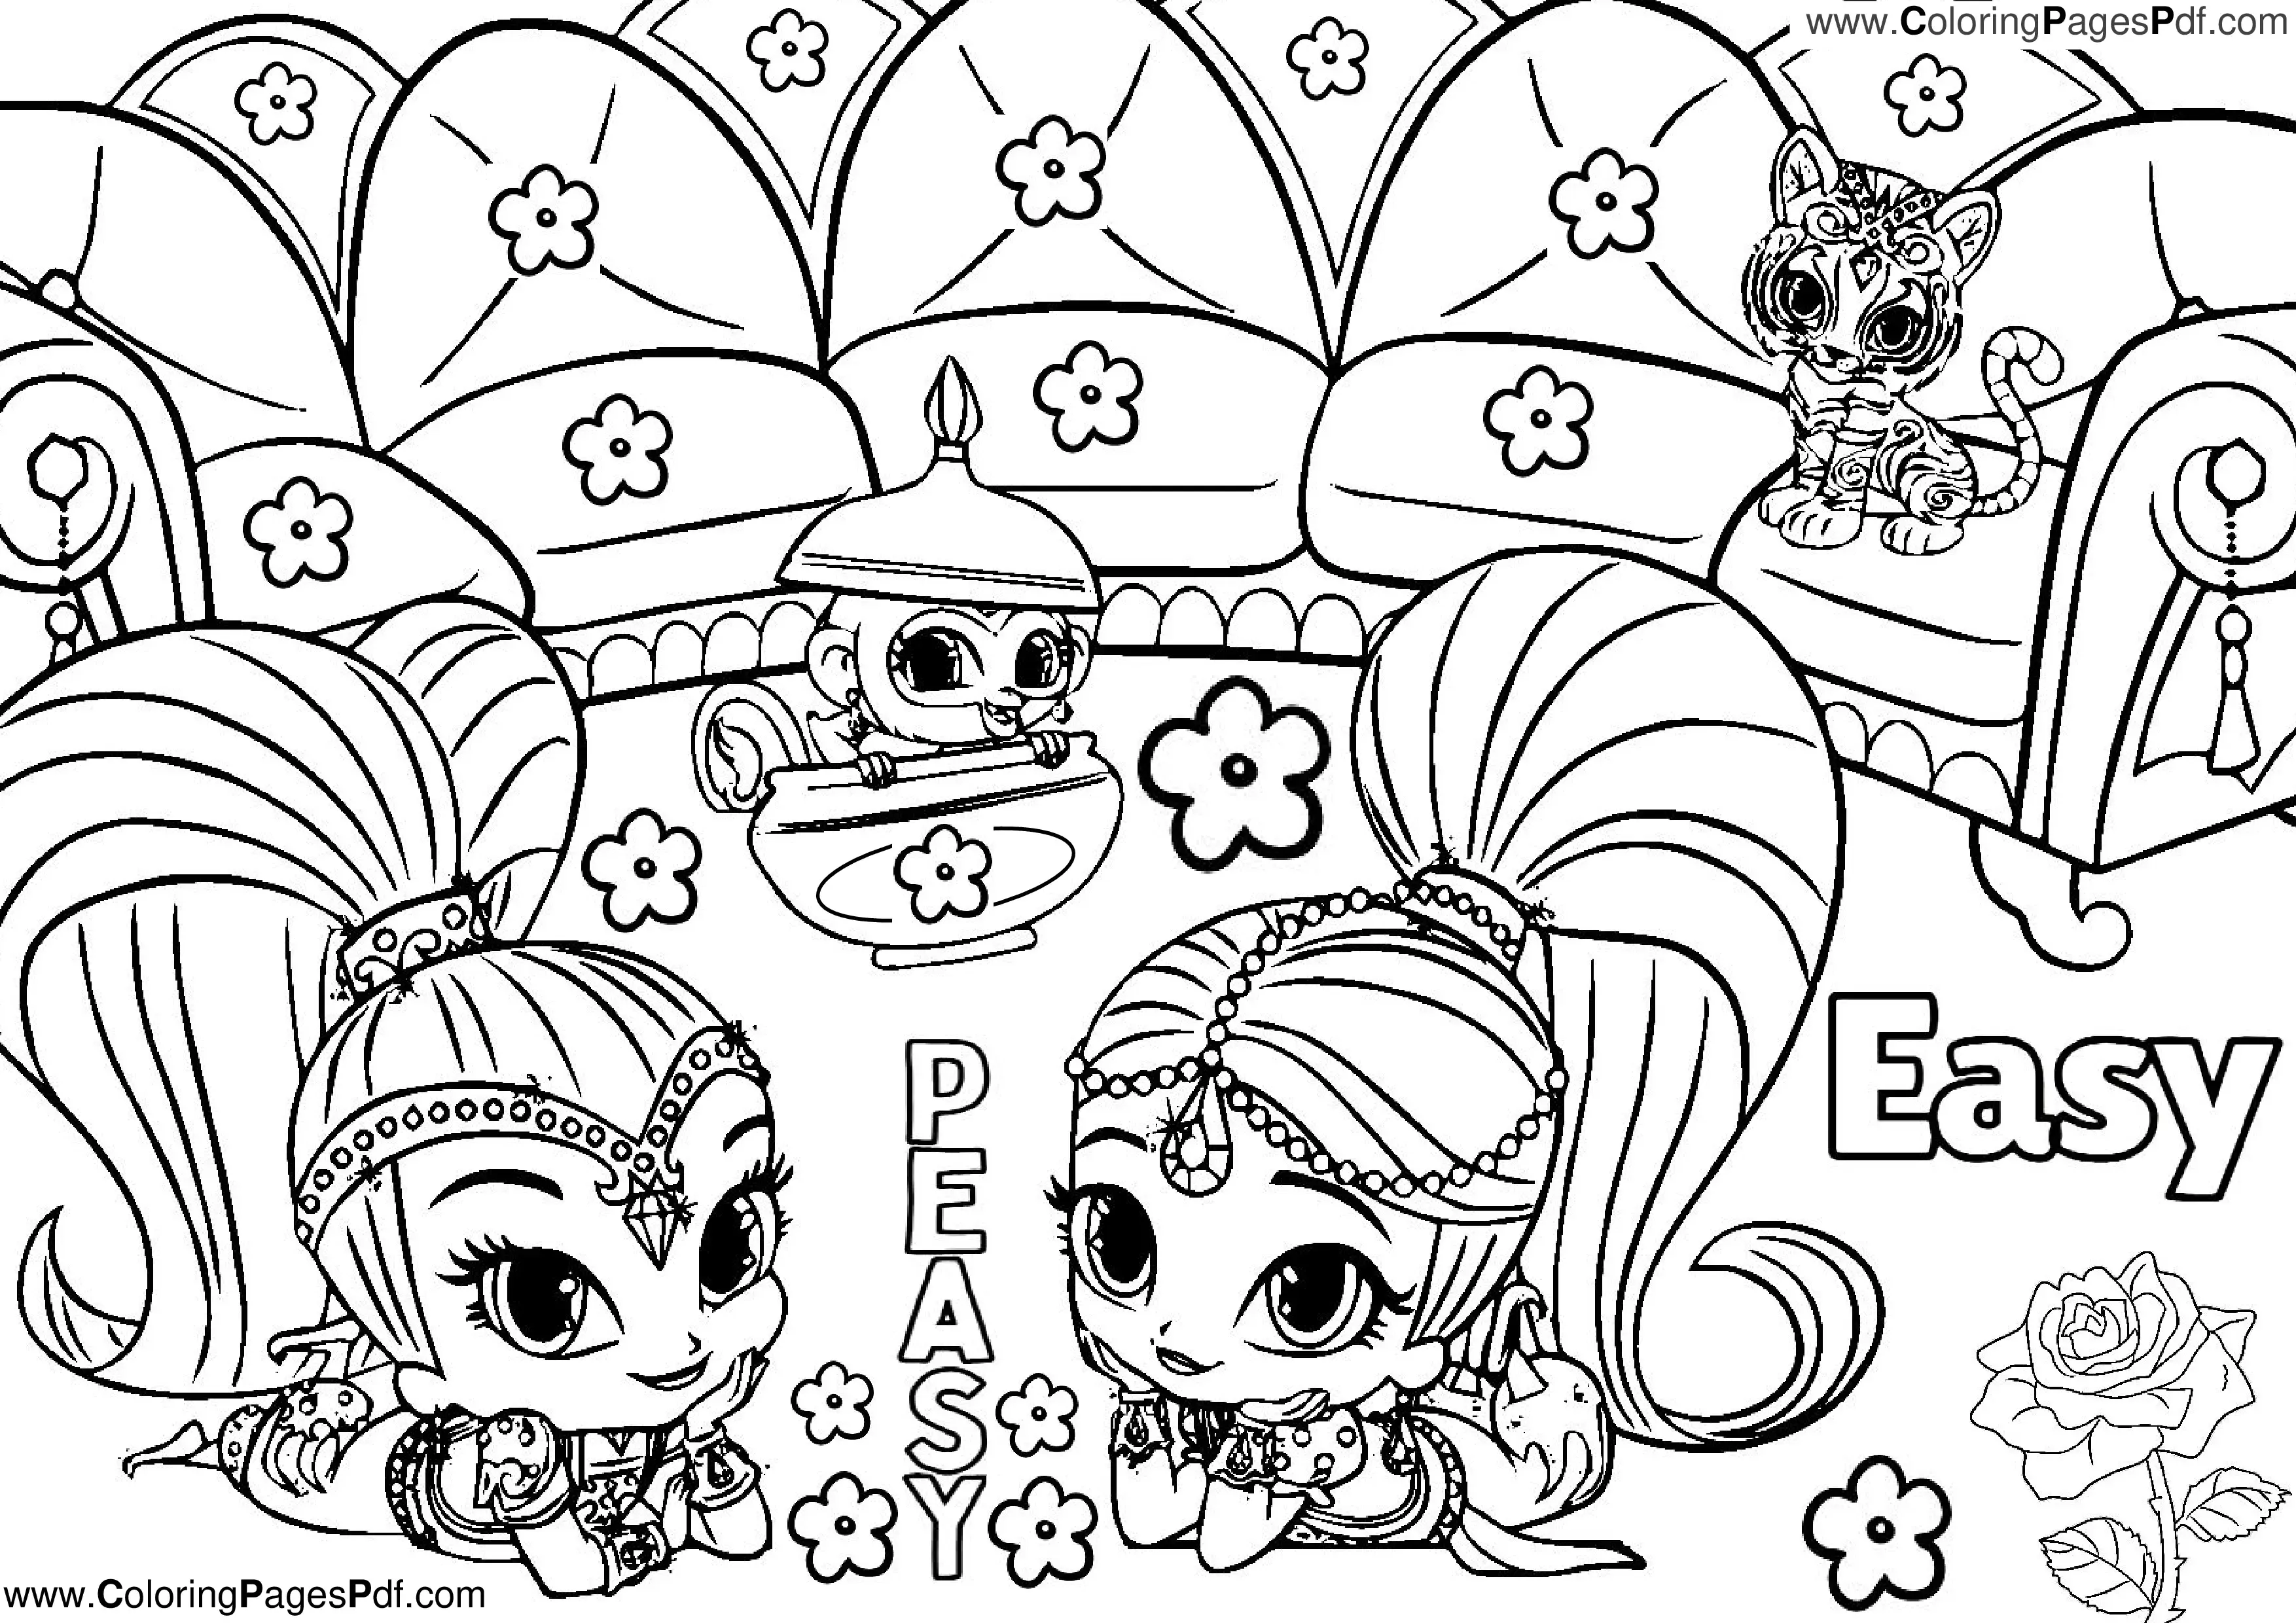 Easy shimmer and shine coloring pages